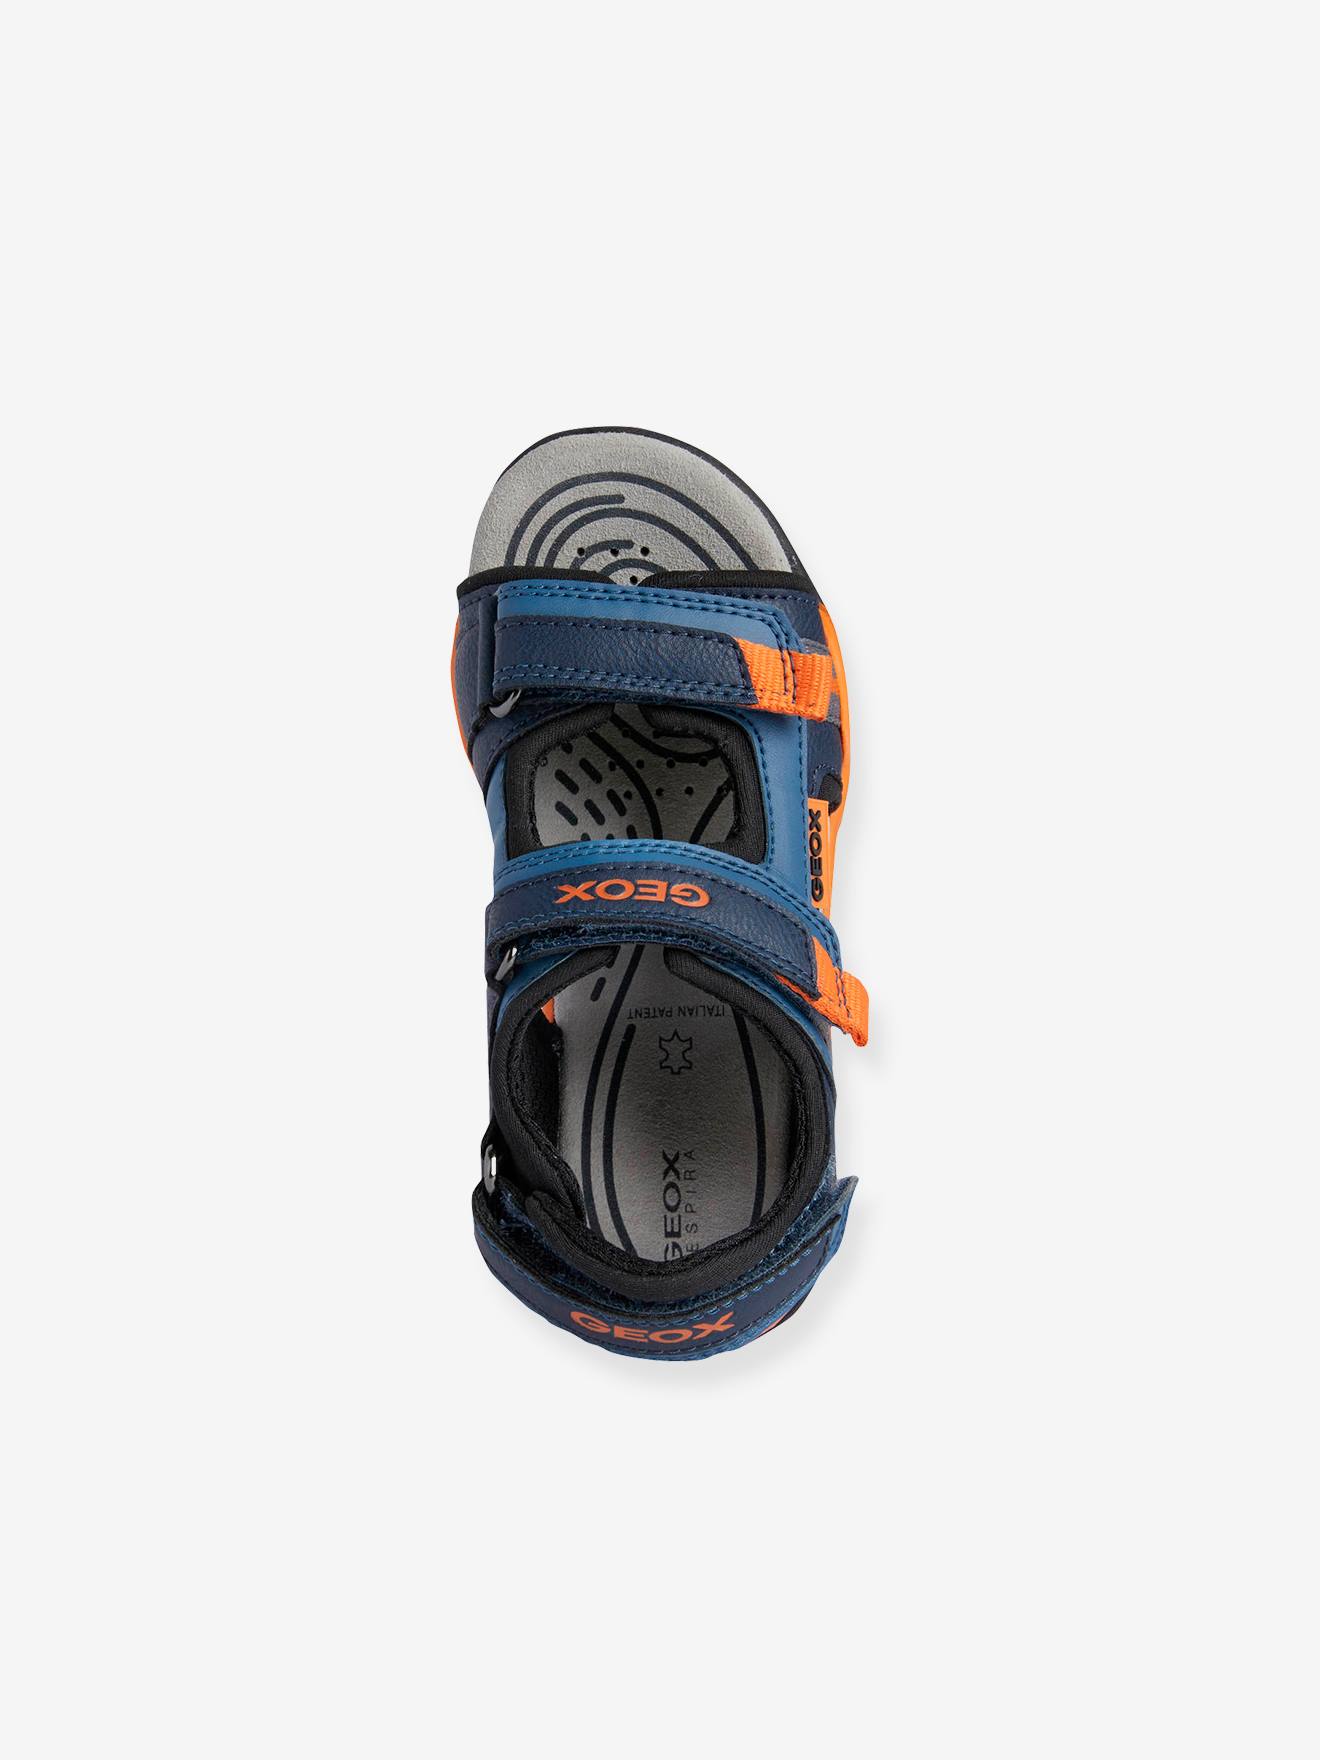 Sandals for Boys, J. Borealis B.A GEOX® Shoes blue medium by solid, 